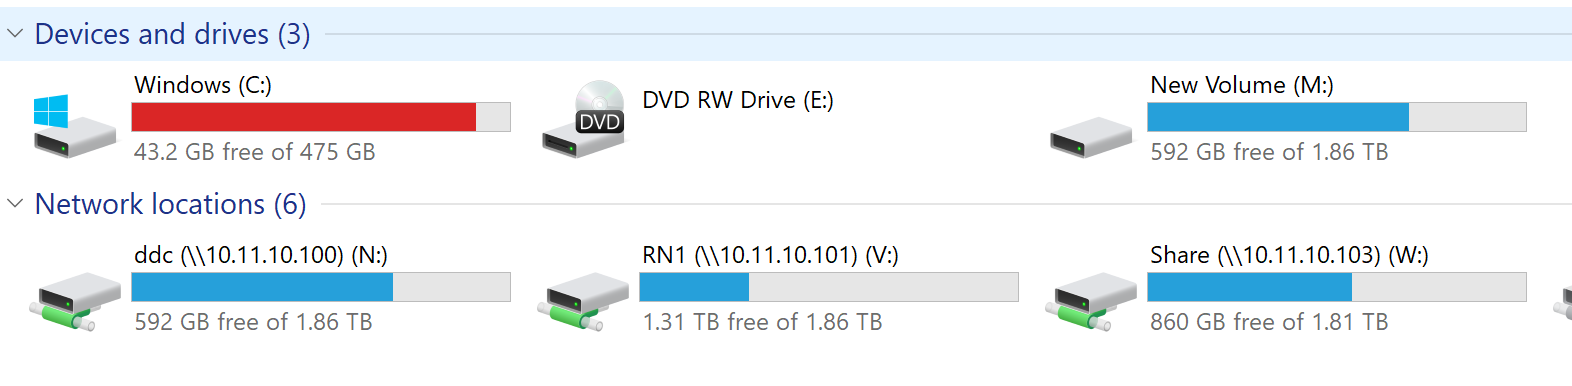 Network drives